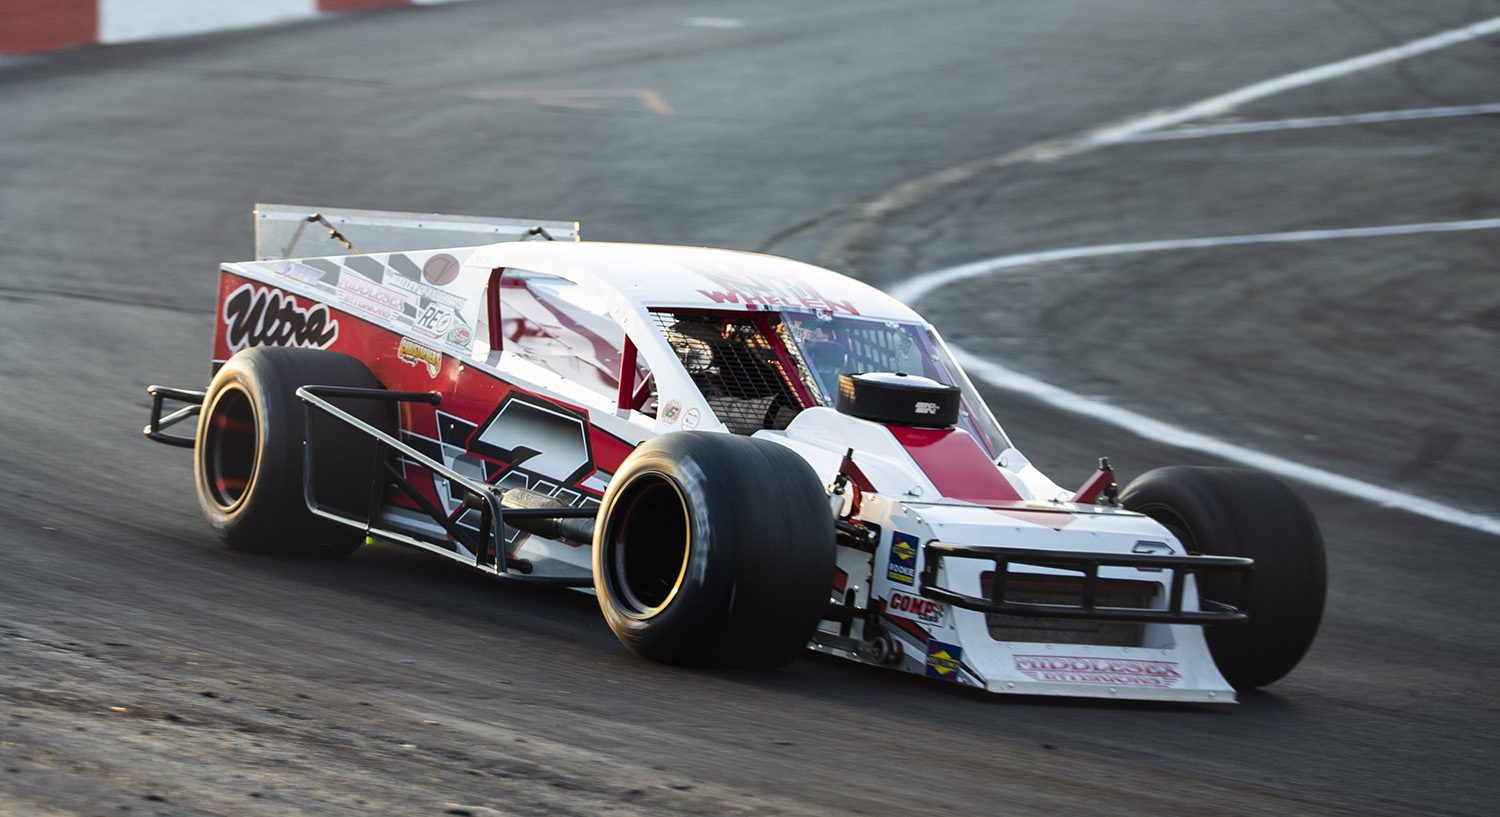 Mike Christopher, Jr., driver of the #7 Ultra Wheel Chevrolet, during qualifying for the Miller Lite 200 for the Whelen Modified Tour at Riverhead Raceway on September 18, 2021 in Riverhead, New York. (Adam Glanzman/NASCAR)